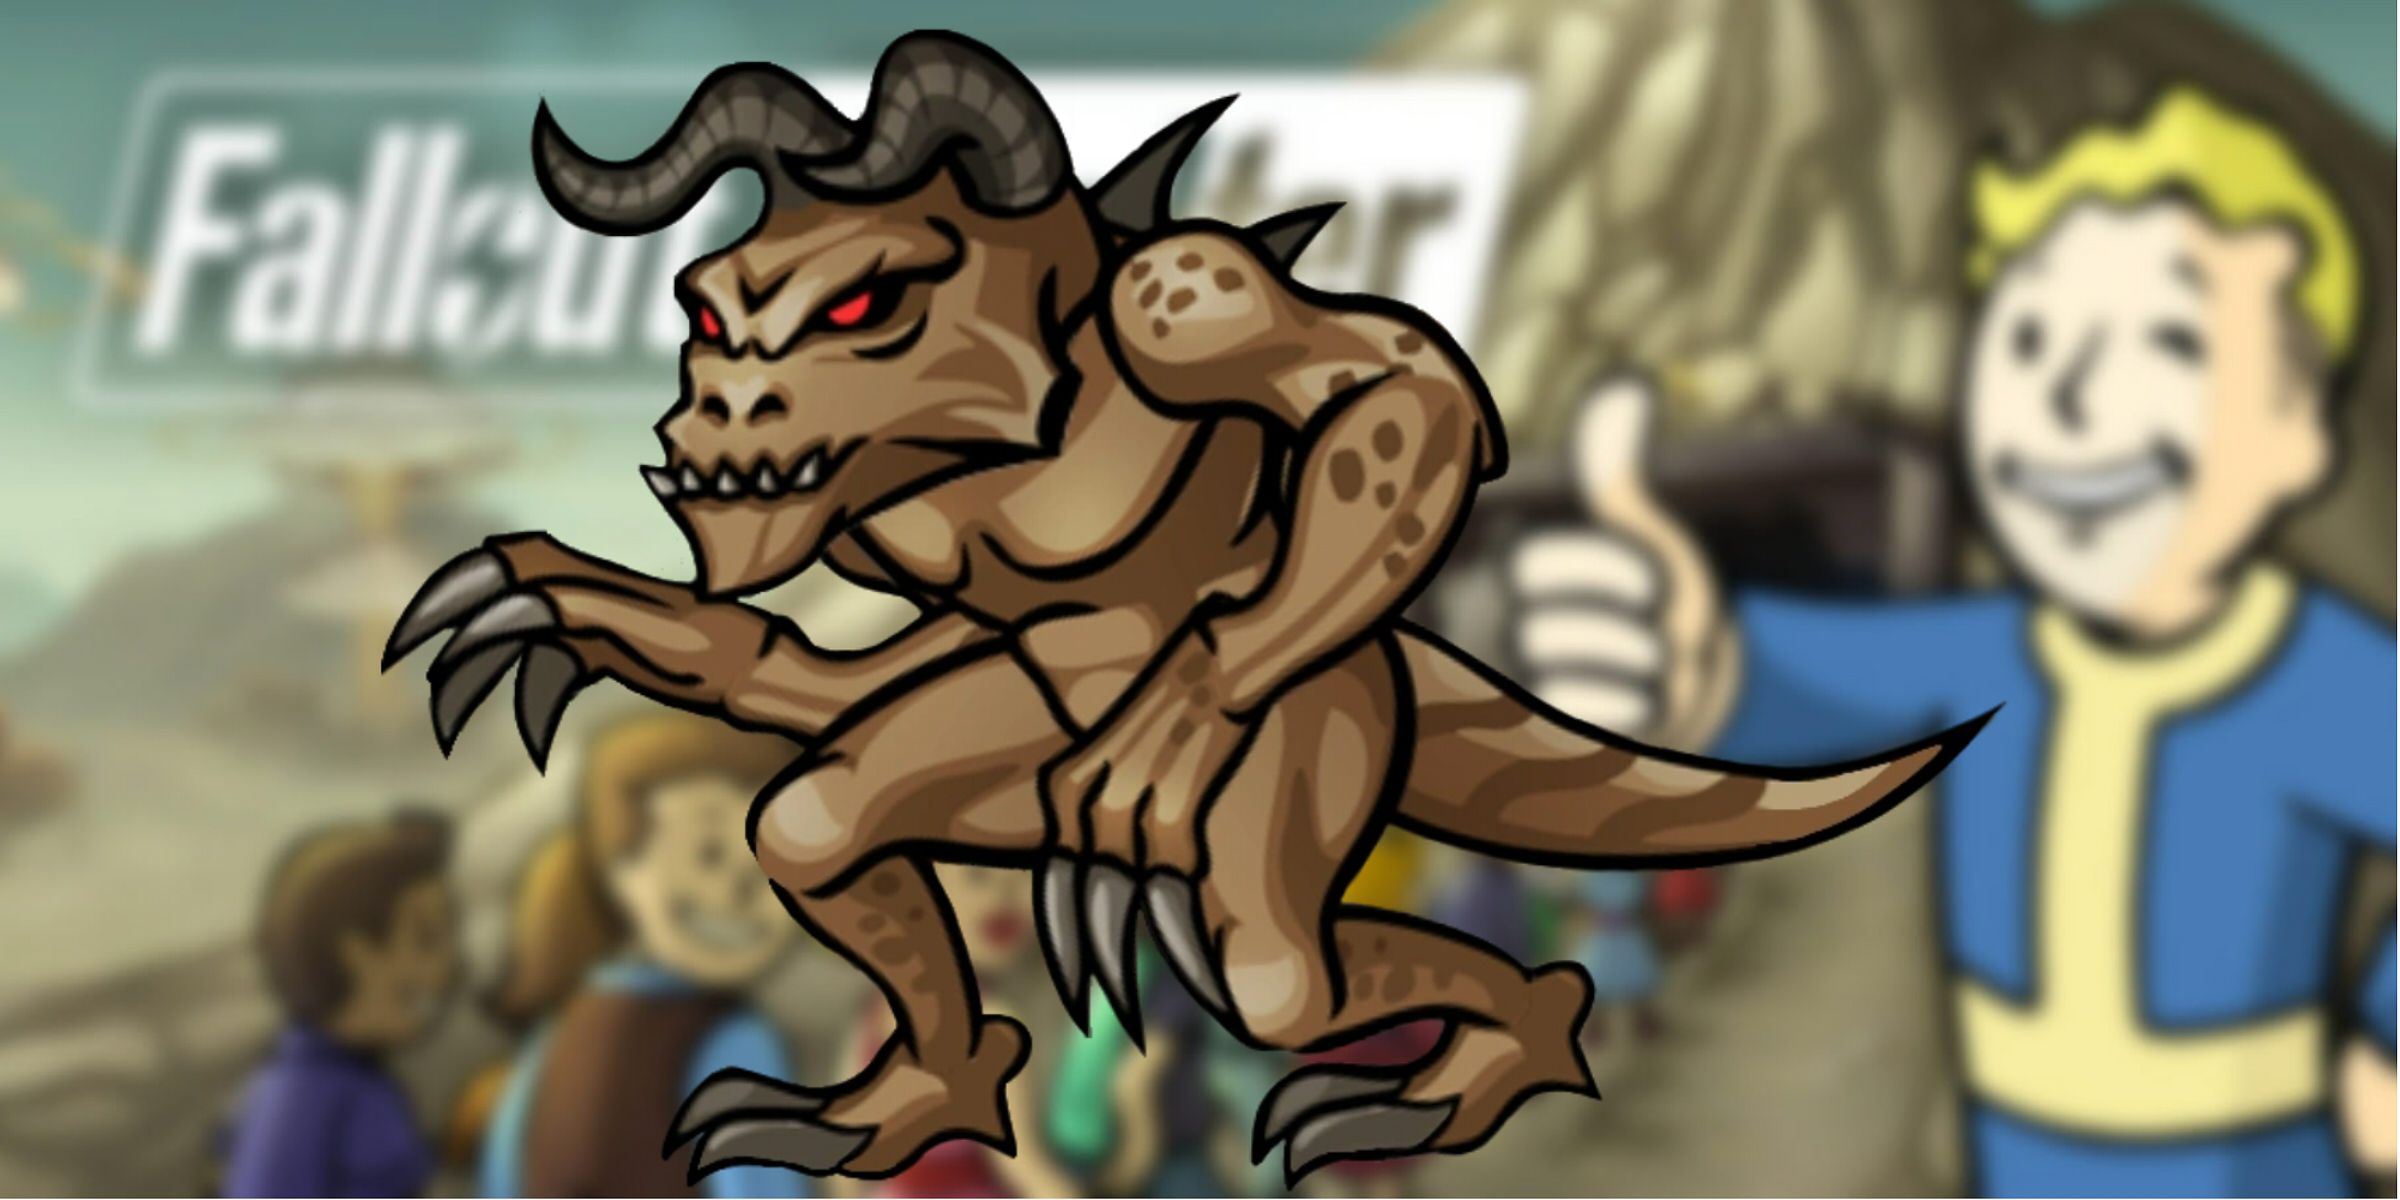 deathclaw in fallout shelter